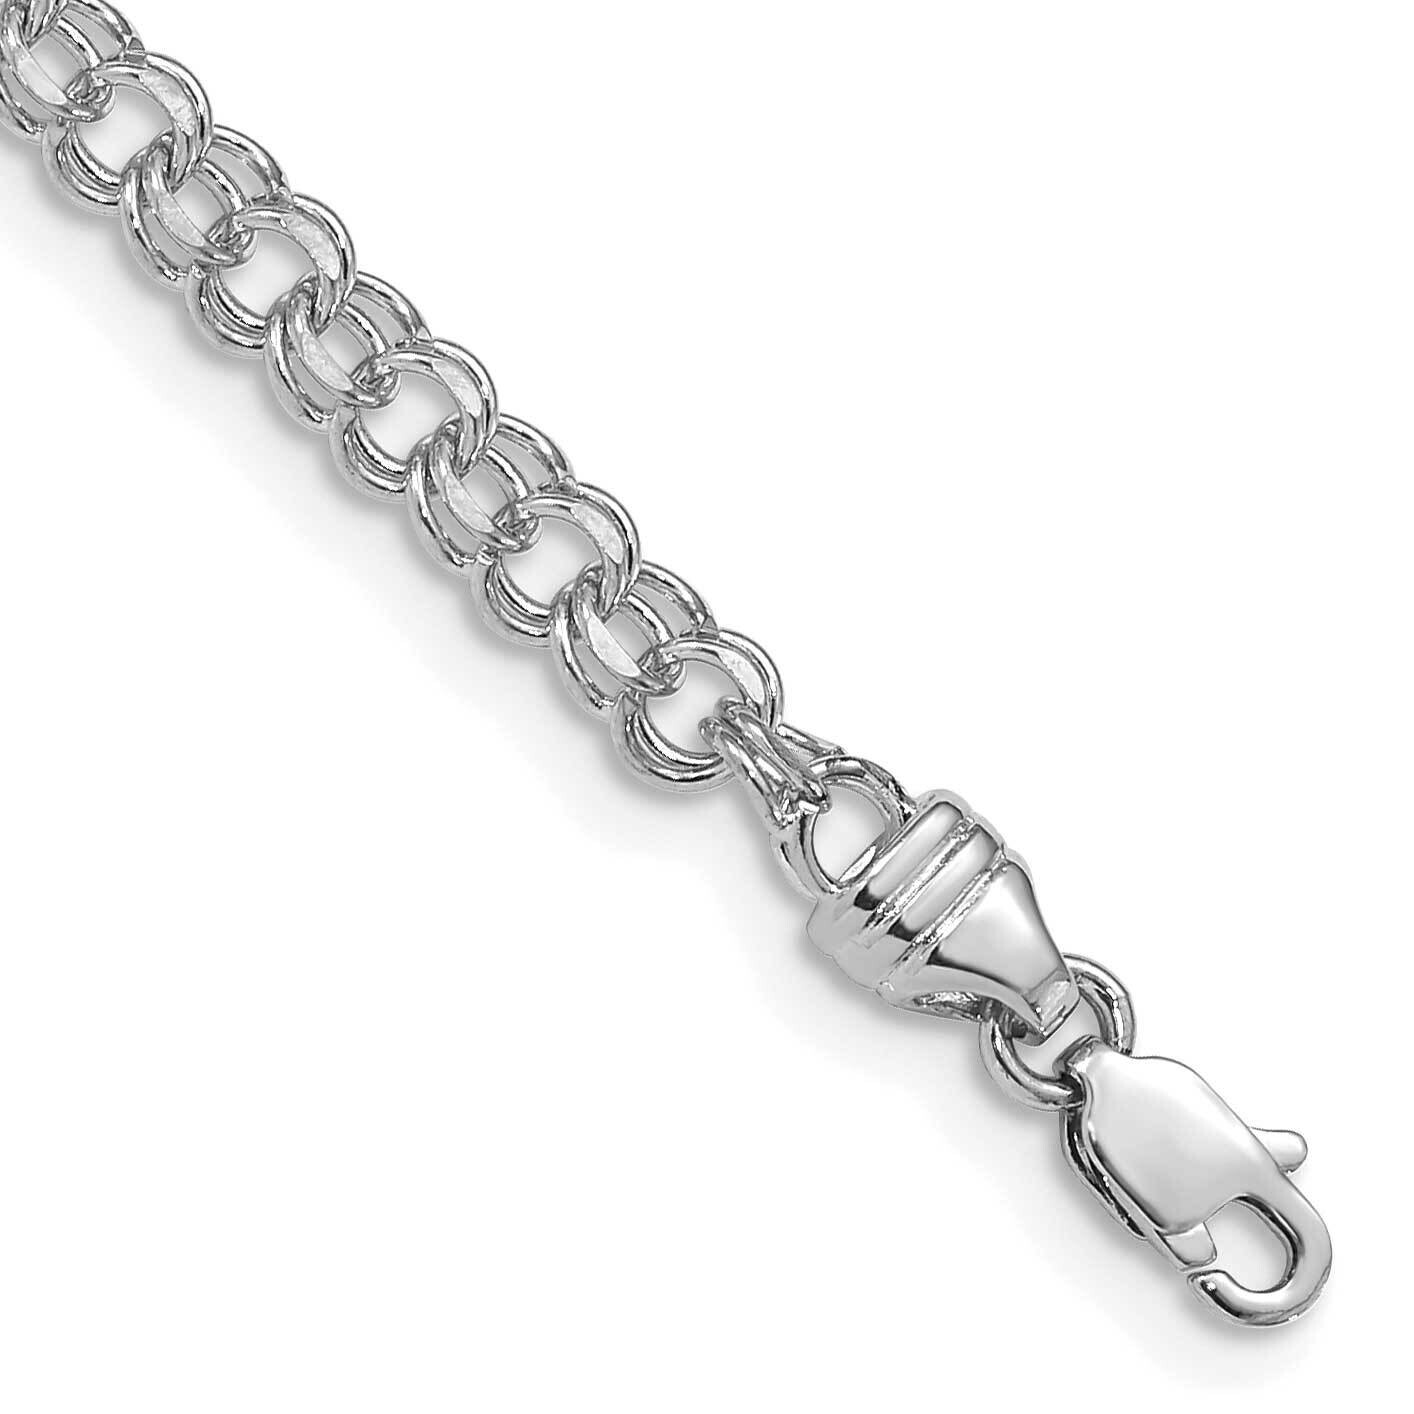 7 Inch 3.75mm Solid Double Link Charm Bracelet 14k White Gold DOH15W-7